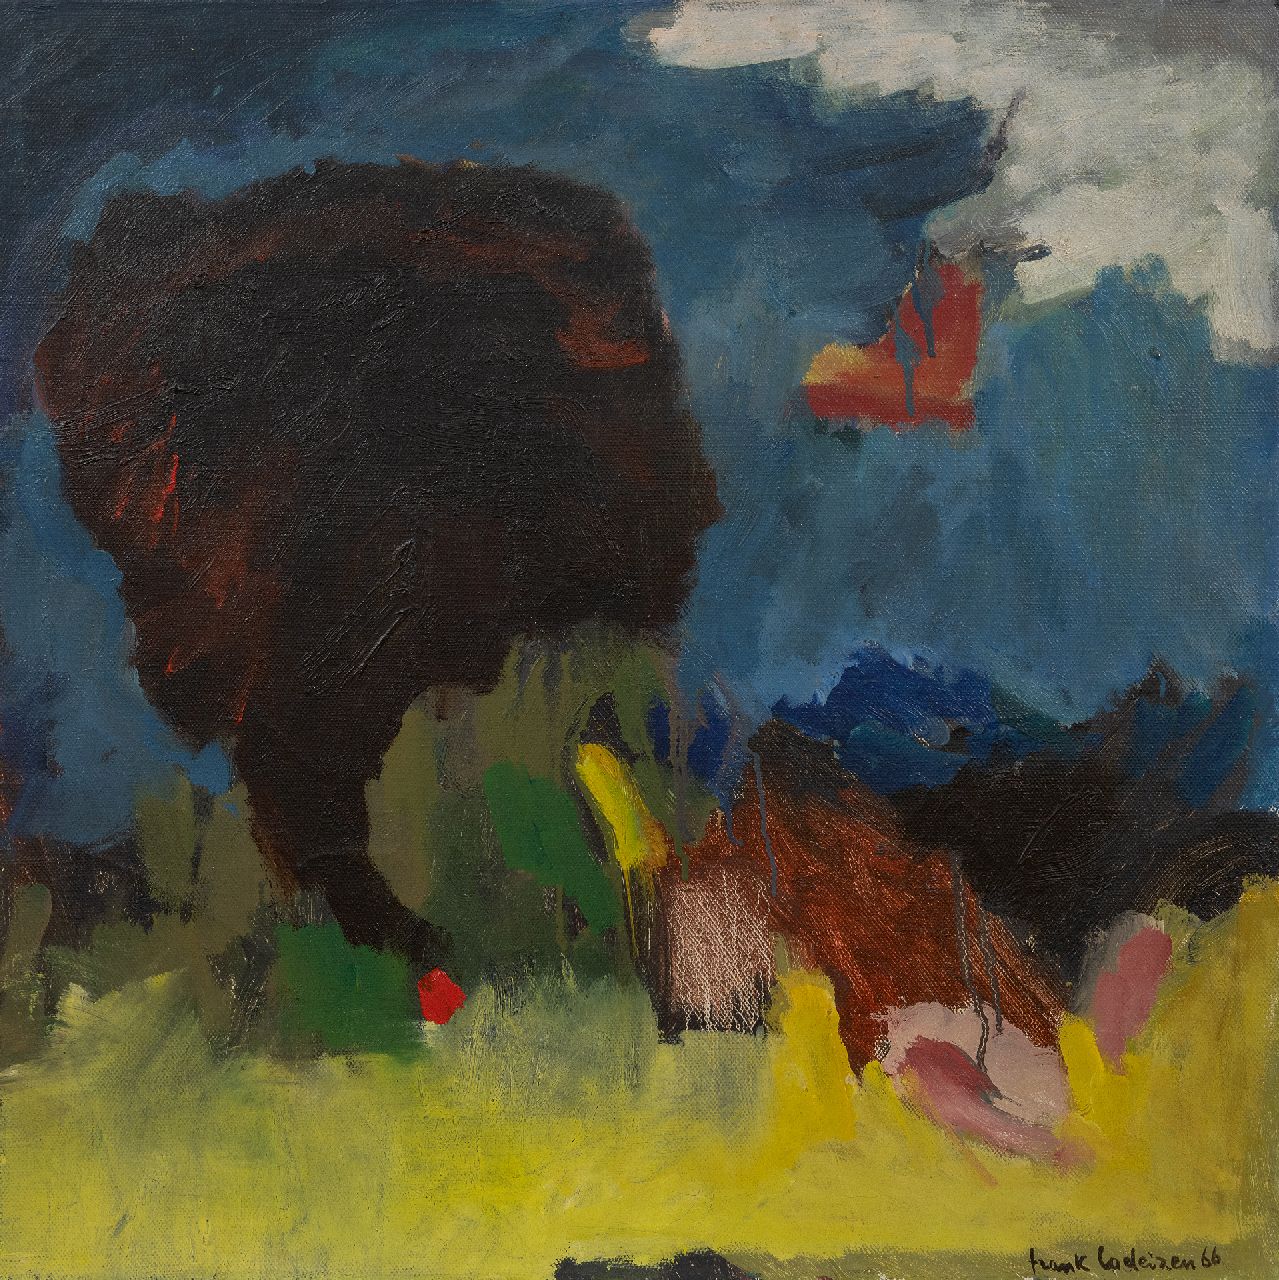 Frank Lodeizen | Landscape, oil on canvas, 60.0 x 60.0 cm, signed l.r. and dated '66